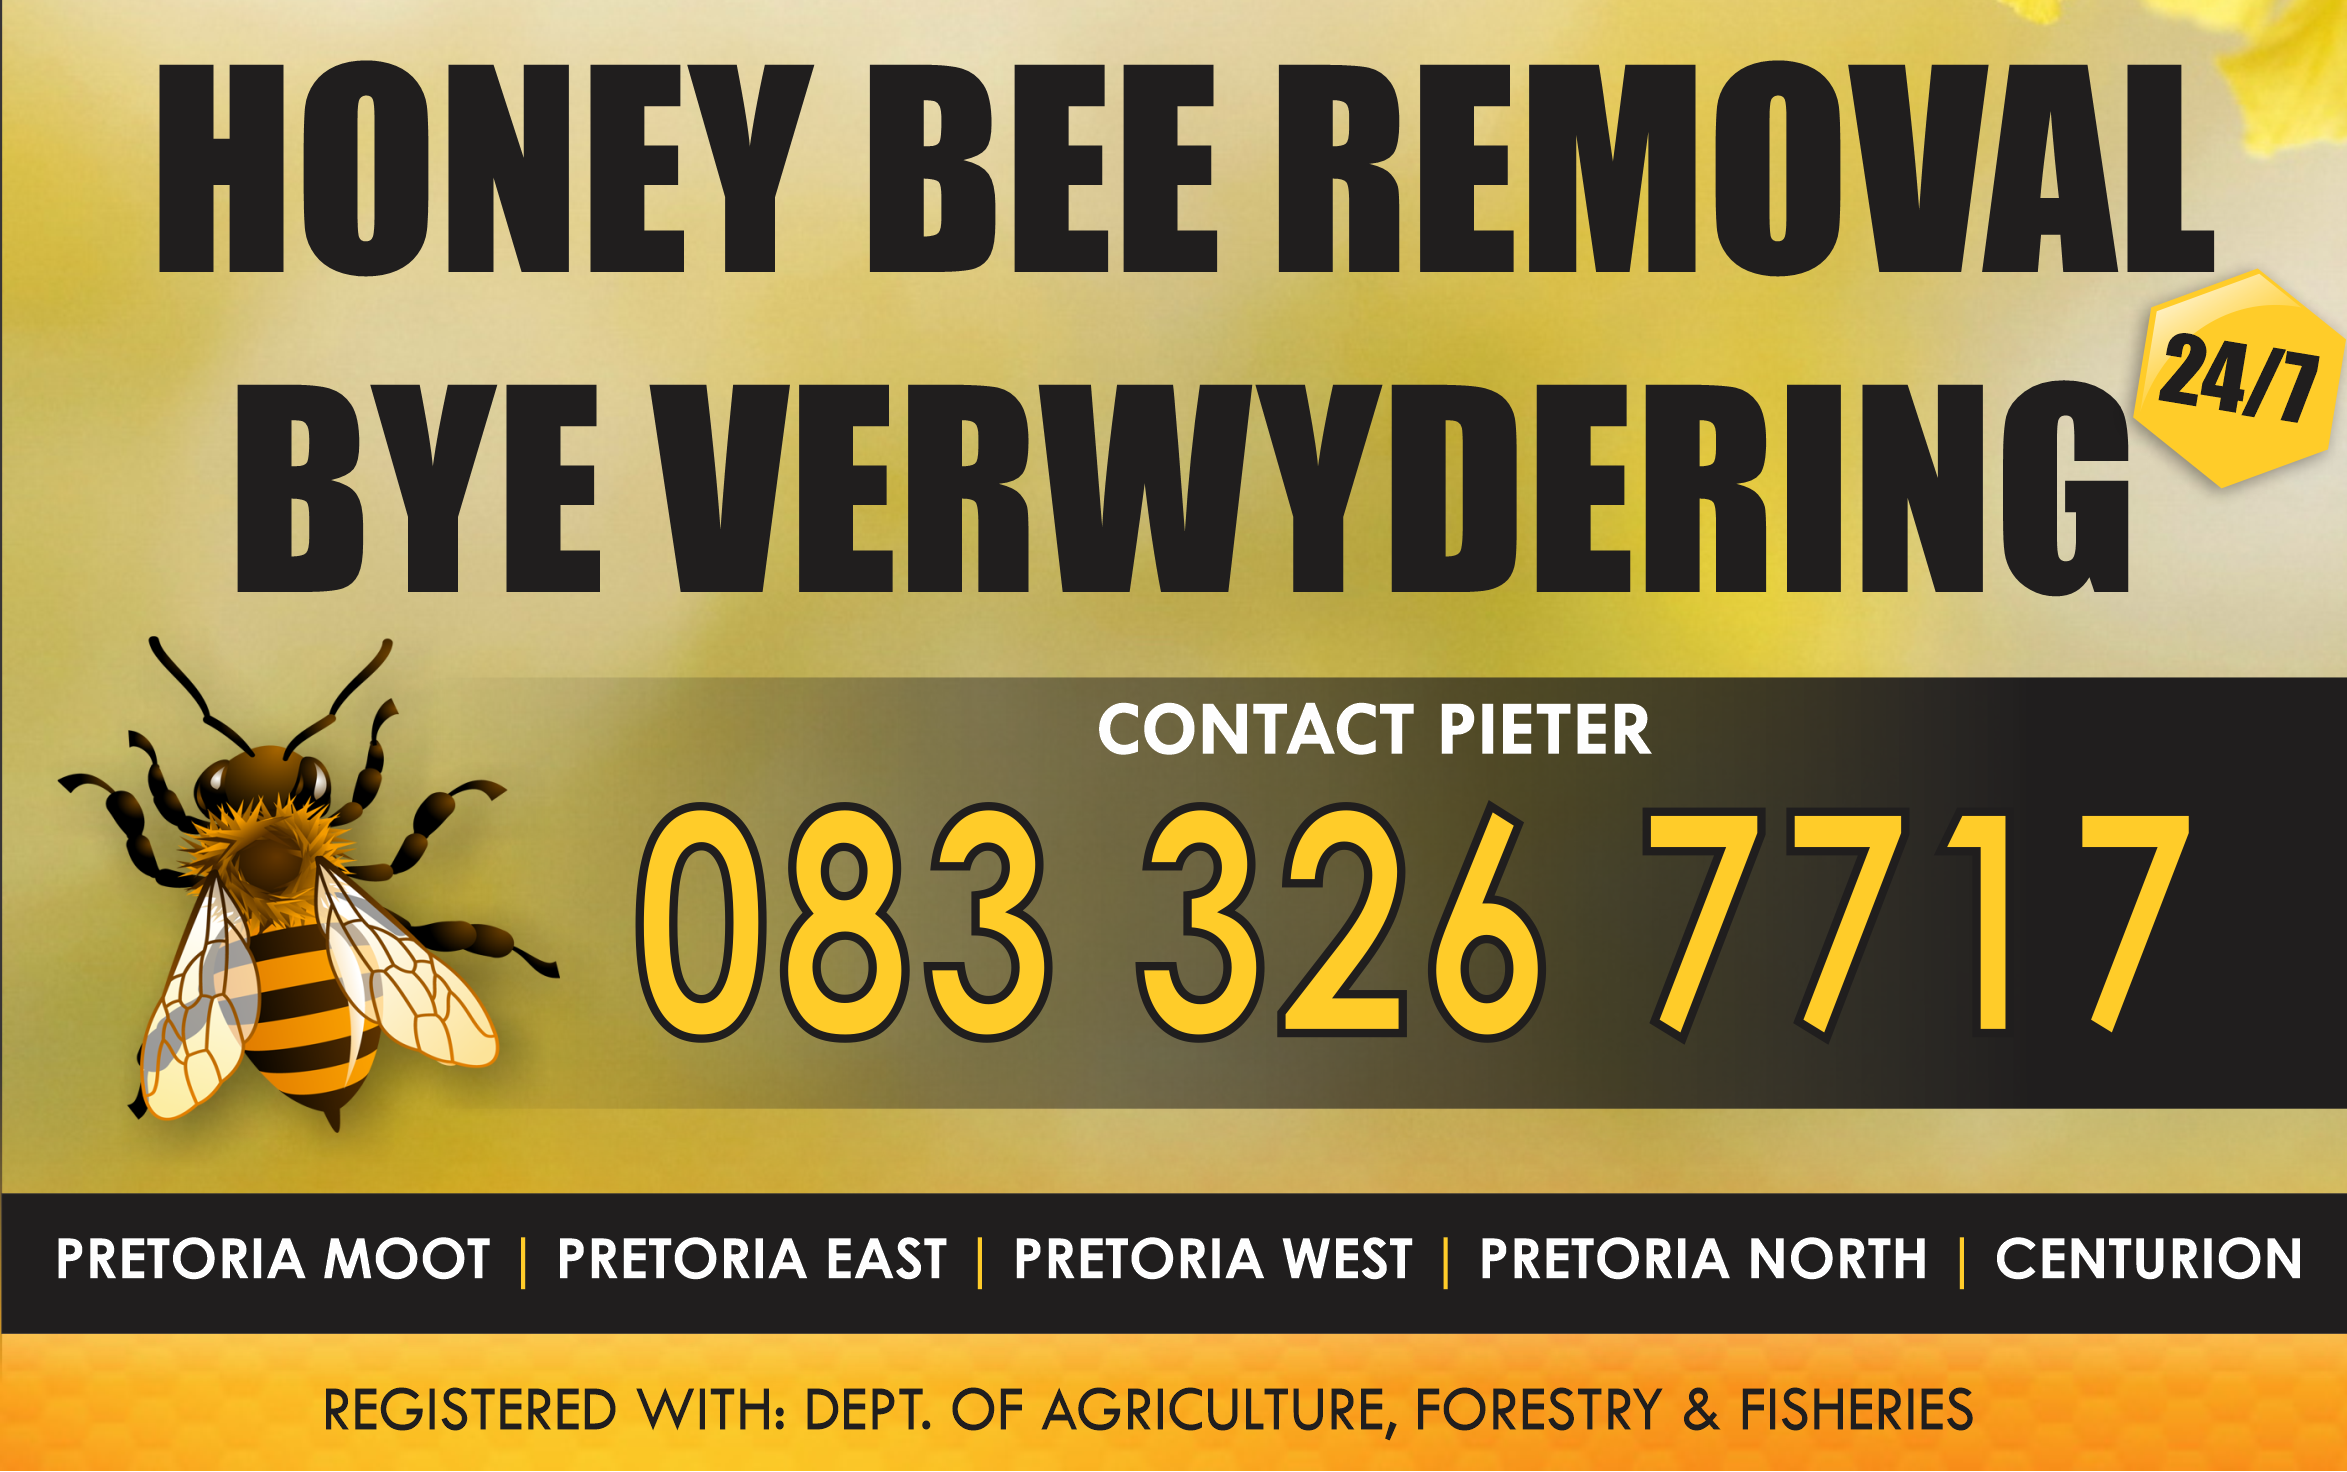 Contact us for professional removal of Honey bees and wasps. We safely remove all kinds of honey bee and wasp nests, big or small, domestic and industrial. Over 20 years of experience! 24/7 bee removal service. Pretoria, Gauteng Registered with Department of Agriculture, Forestry & Fisheries.